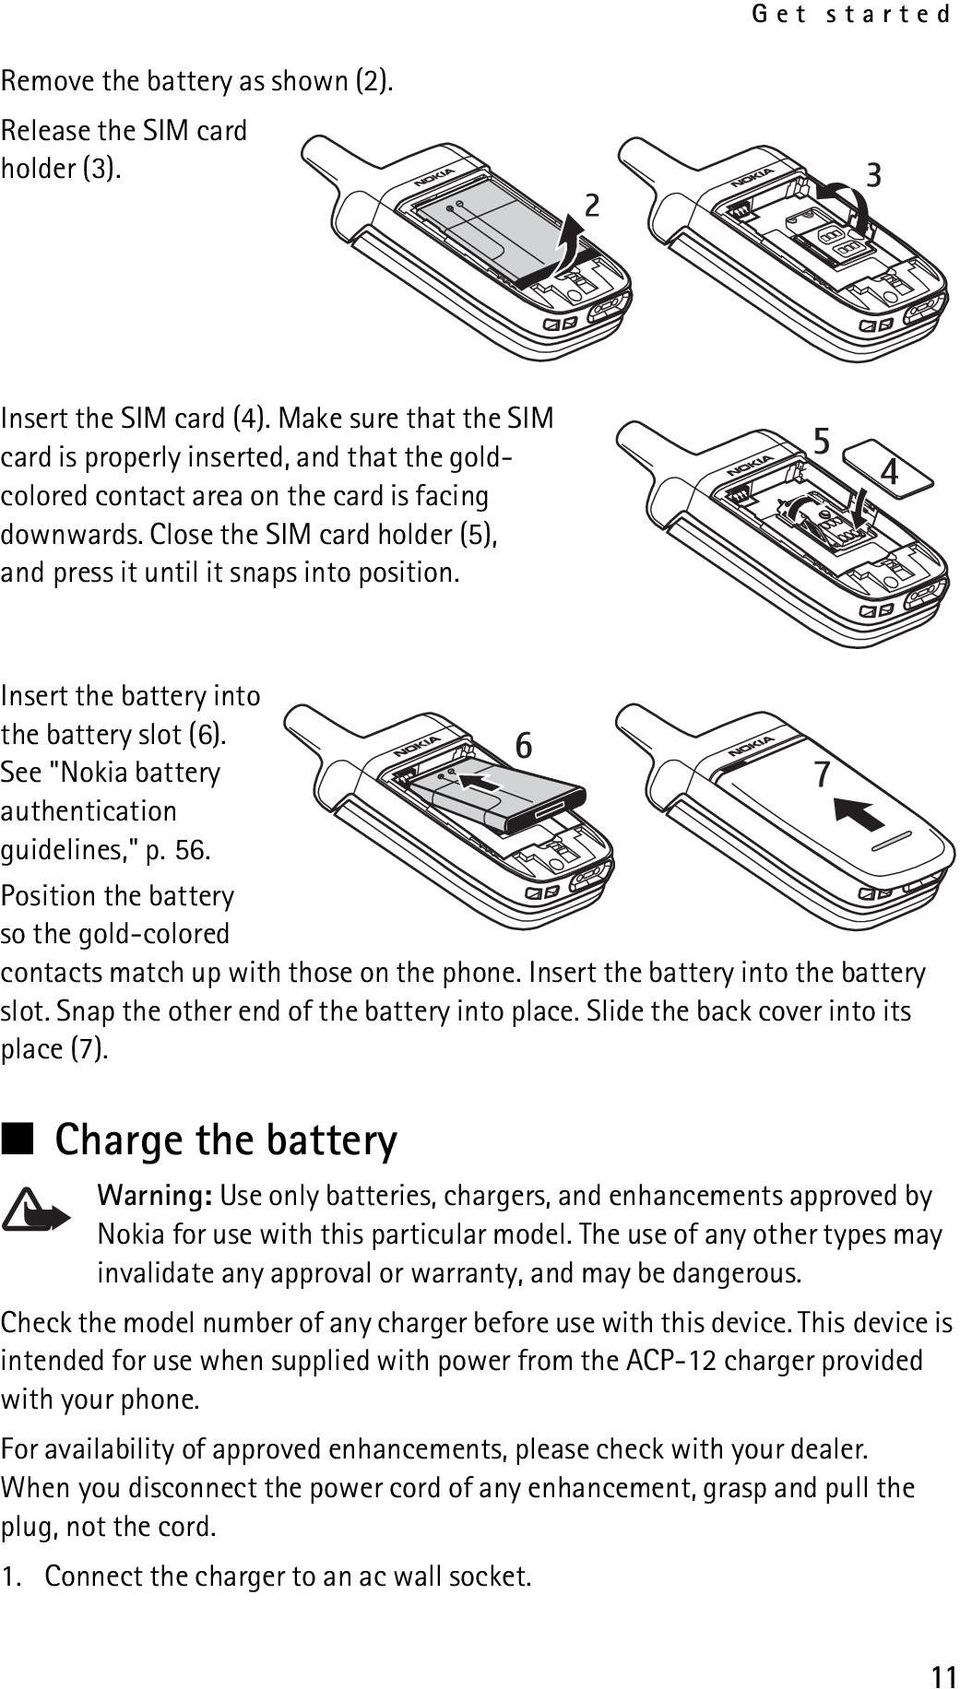 Insert the battery into the battery slot (6). See "Nokia battery authentication guidelines," p. 56. Position the battery so the gold-colored contacts match up with those on the phone.